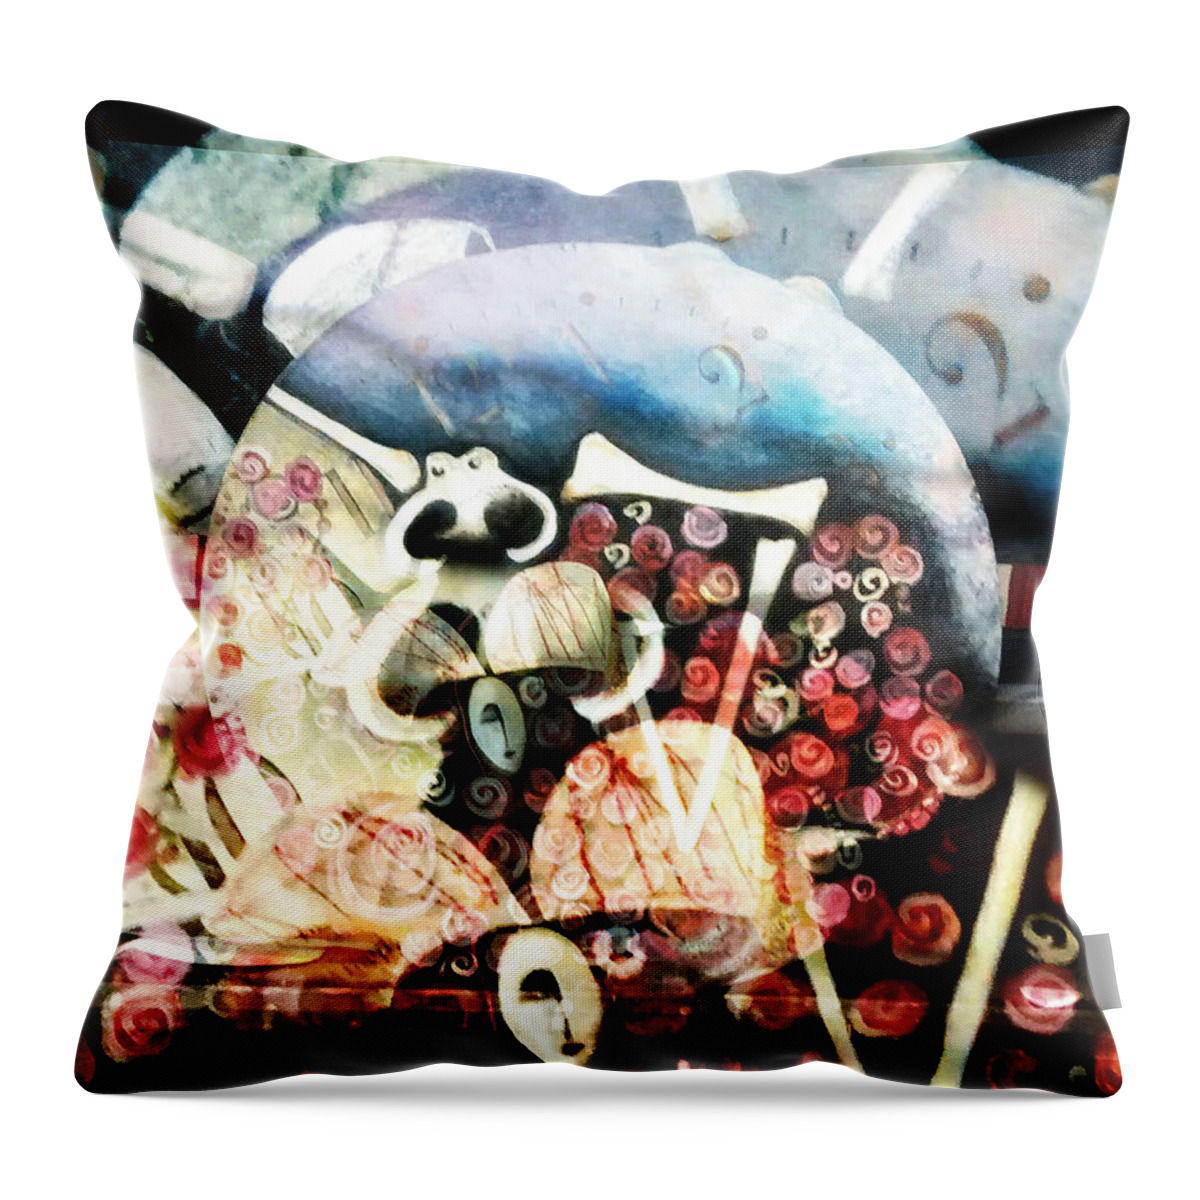 Skeleton Throw Pillow featuring the digital art Less Time #2 by Delight Worthyn